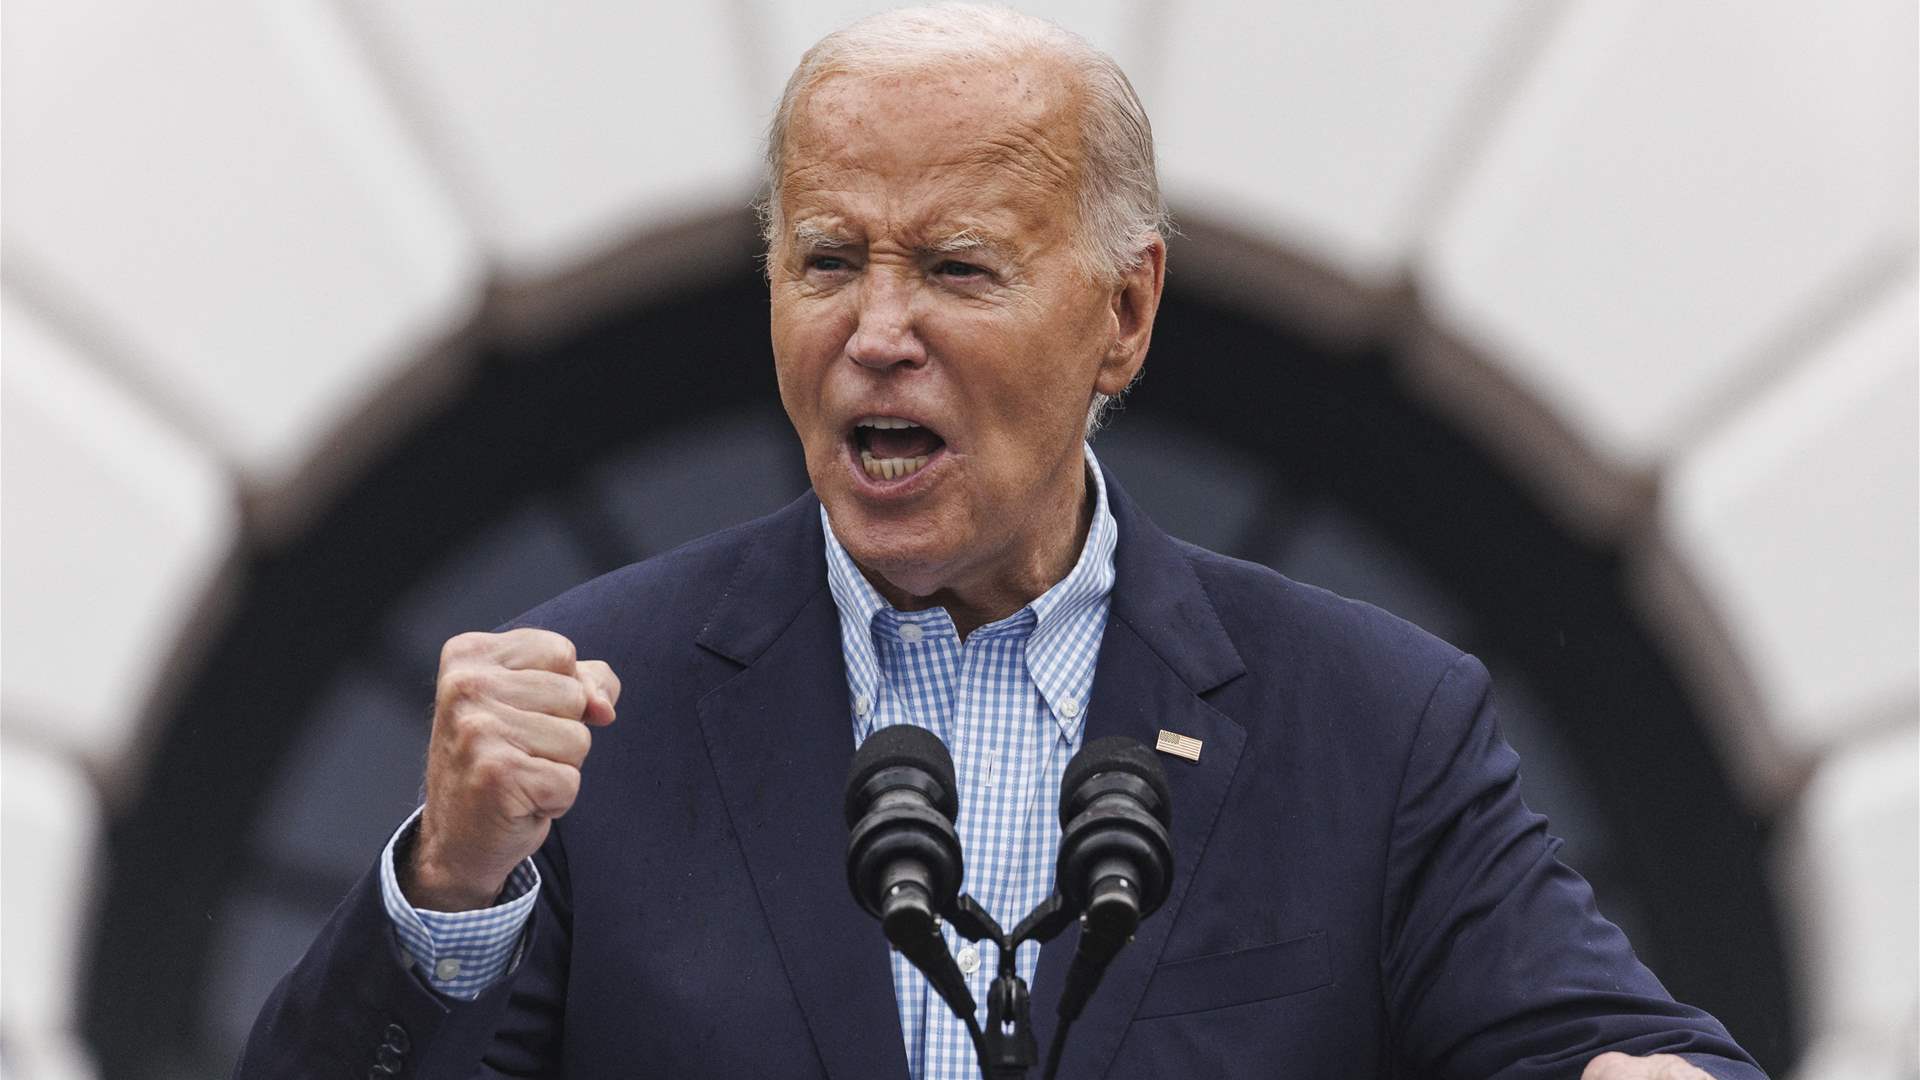 Biden NATO summit a chance to show voters, allies he can still lead